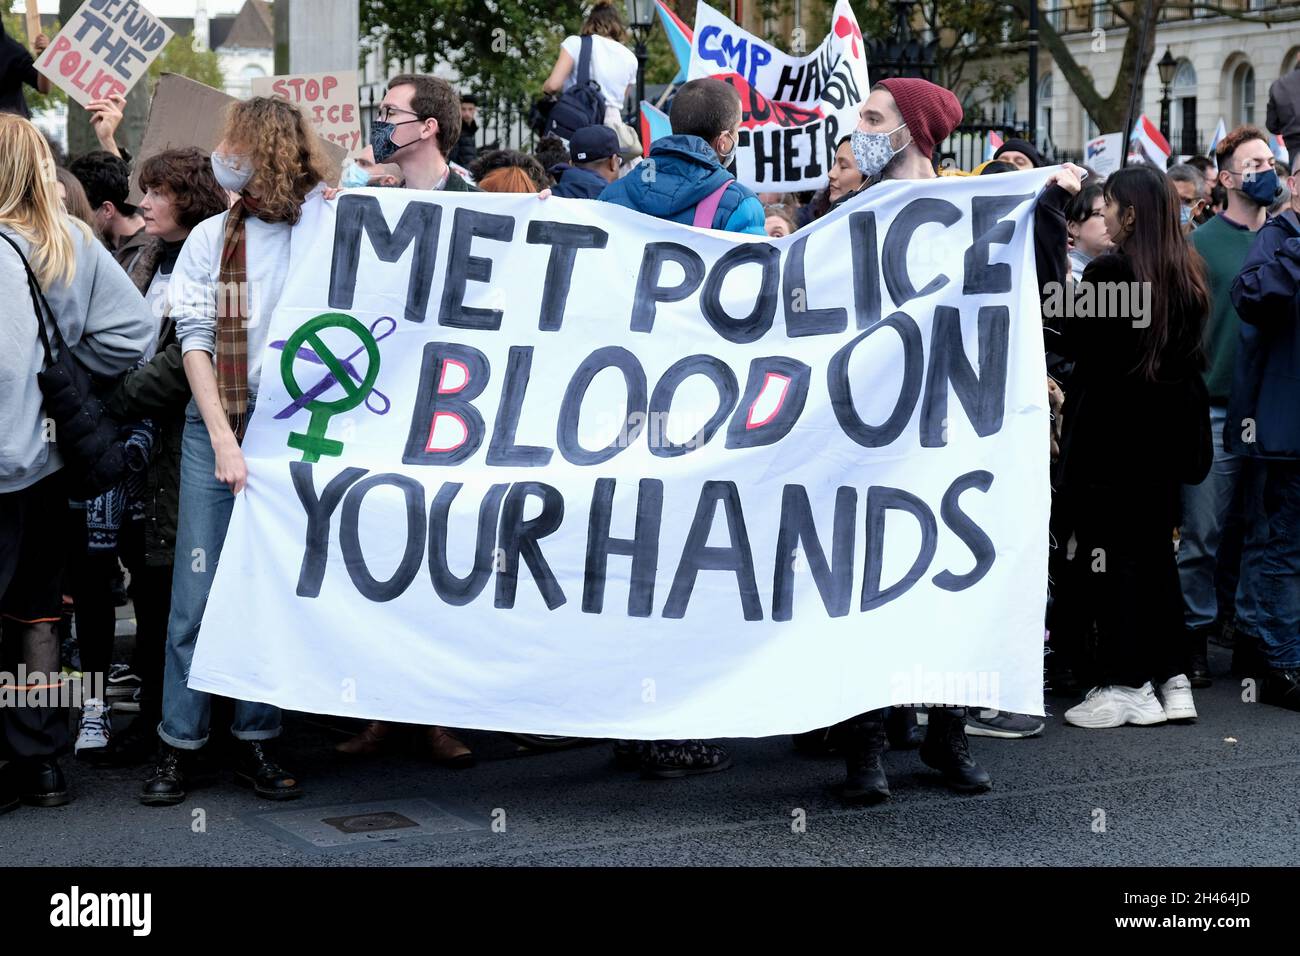 London, UK. Protesters hold up a banner 'Met Police. Blood on your hands'  during the annual memorial march for those who died in police custody. Stock Photo